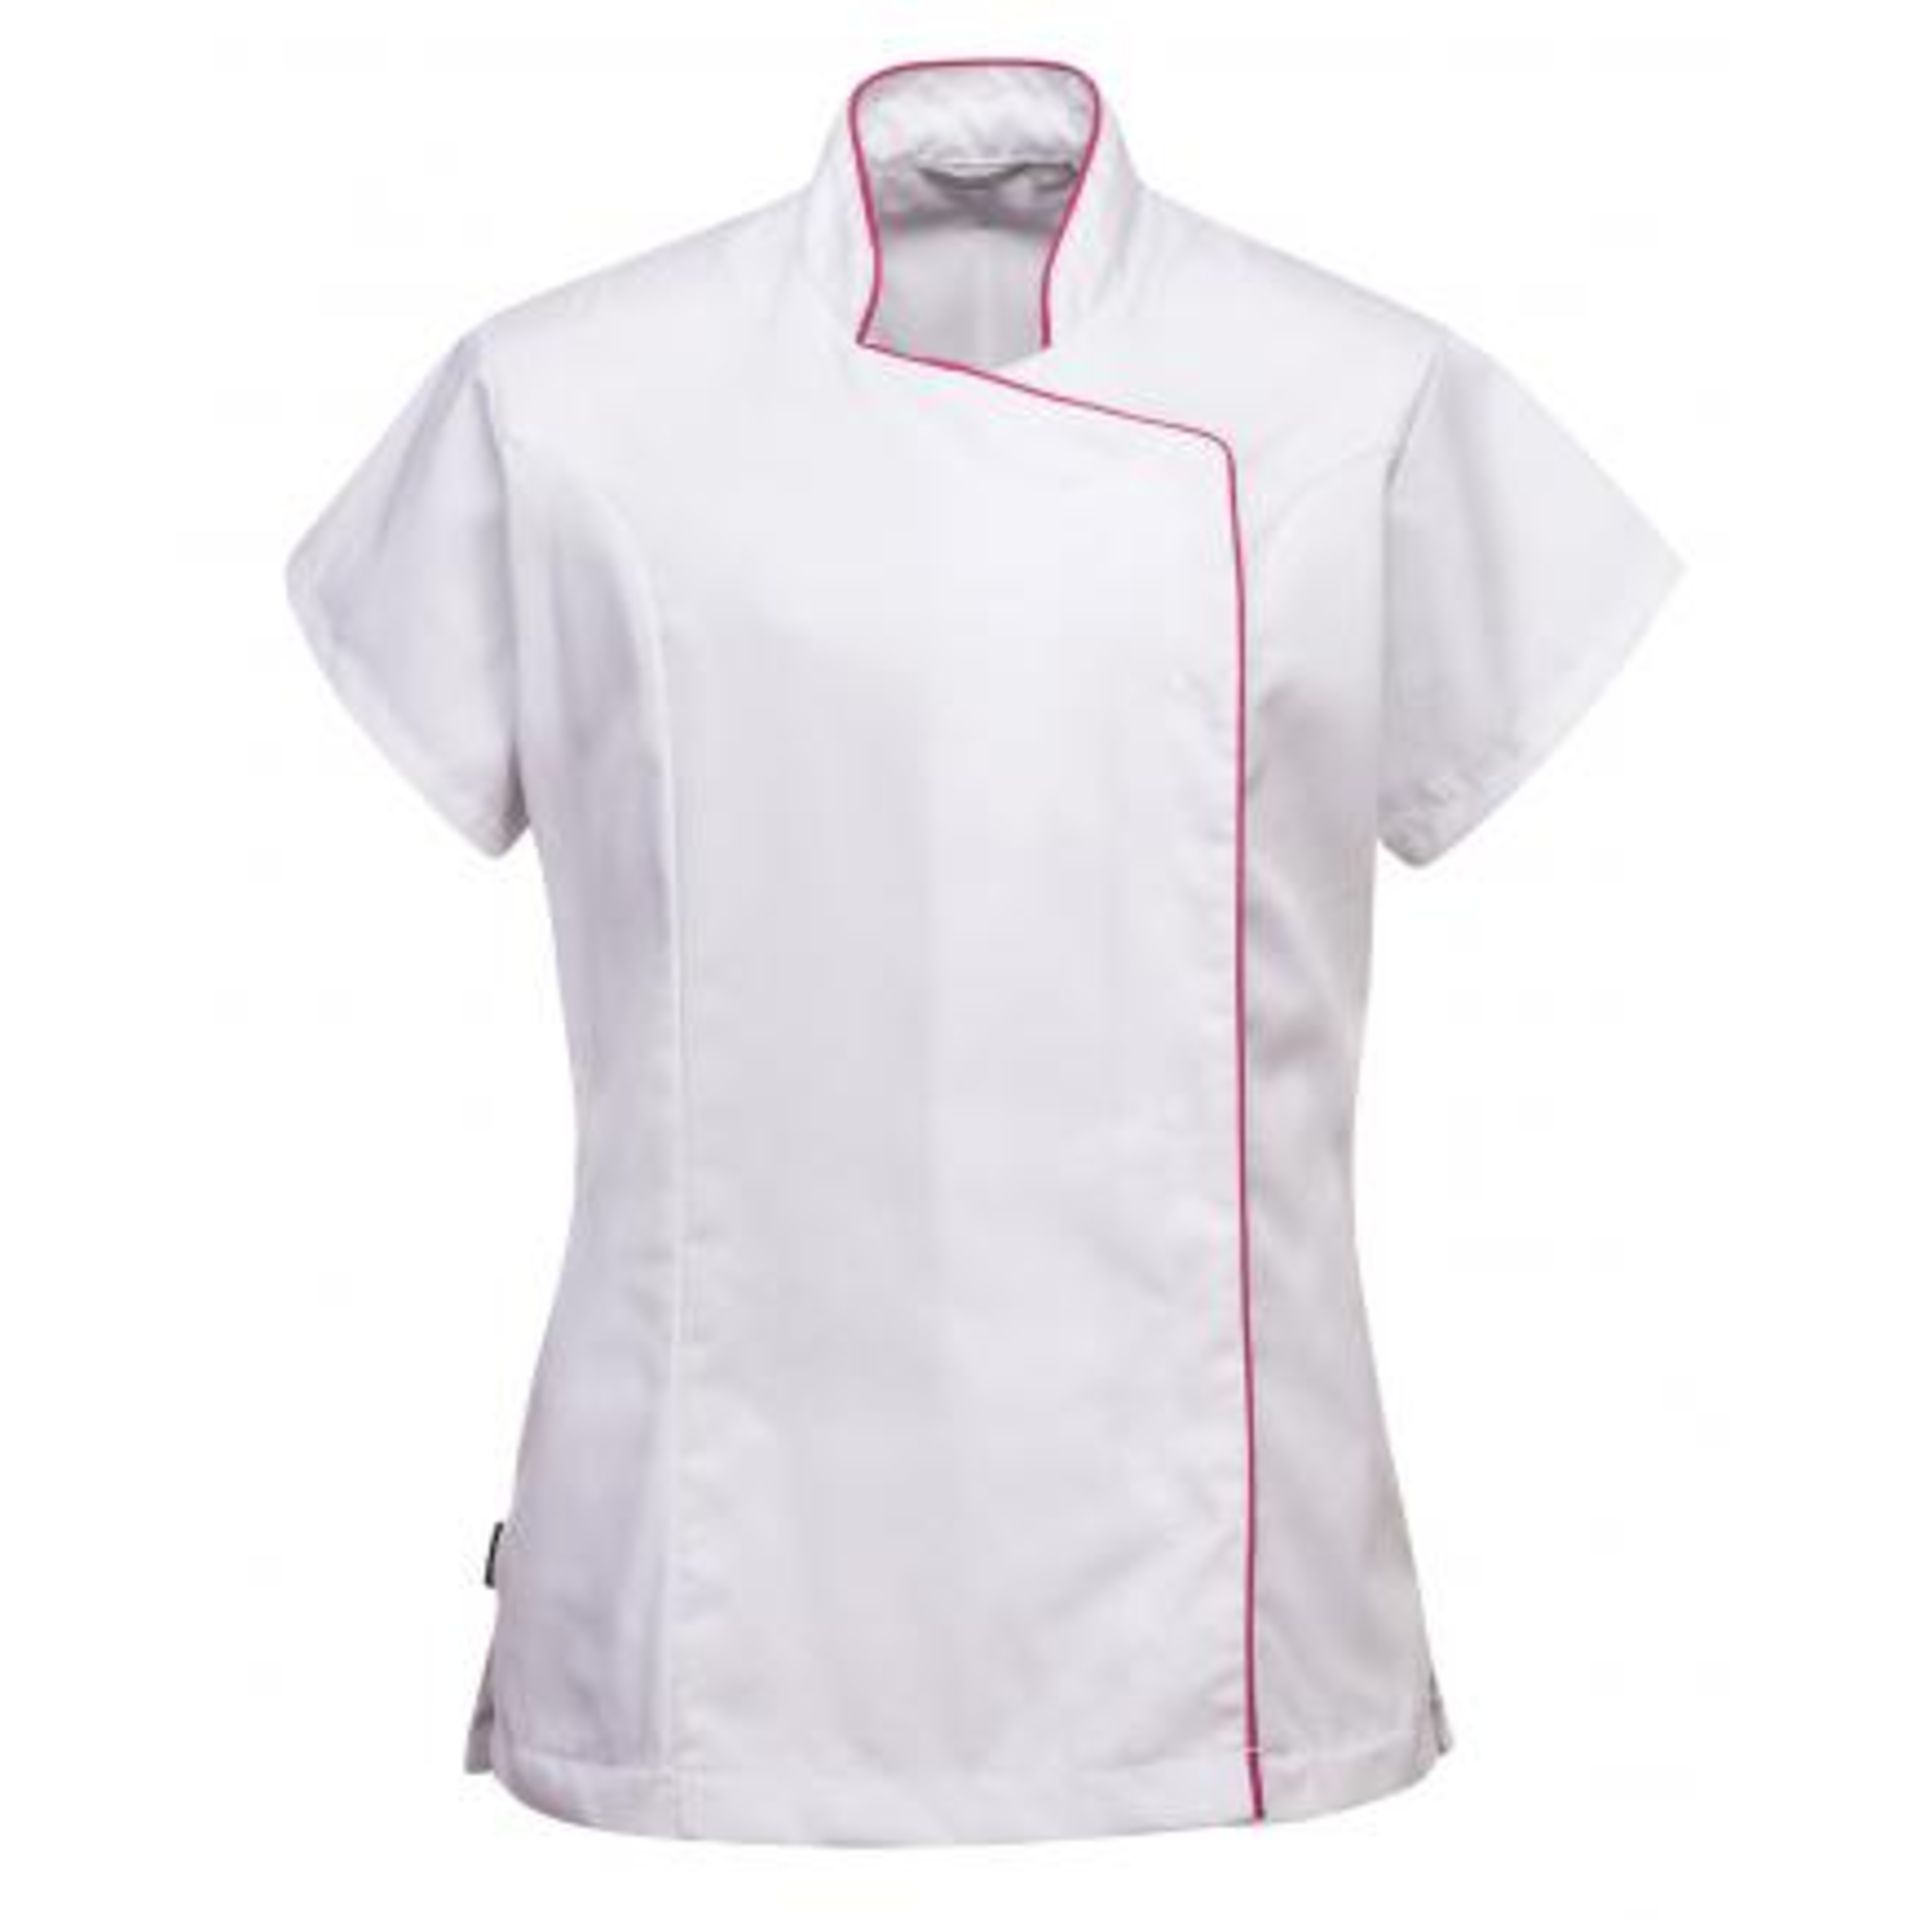 24 x PORTWEST LW15WHRXS - LW15WHR - WRAP WHITE TUNIC. XL. ER34. RRP £20.91 each. This stylish